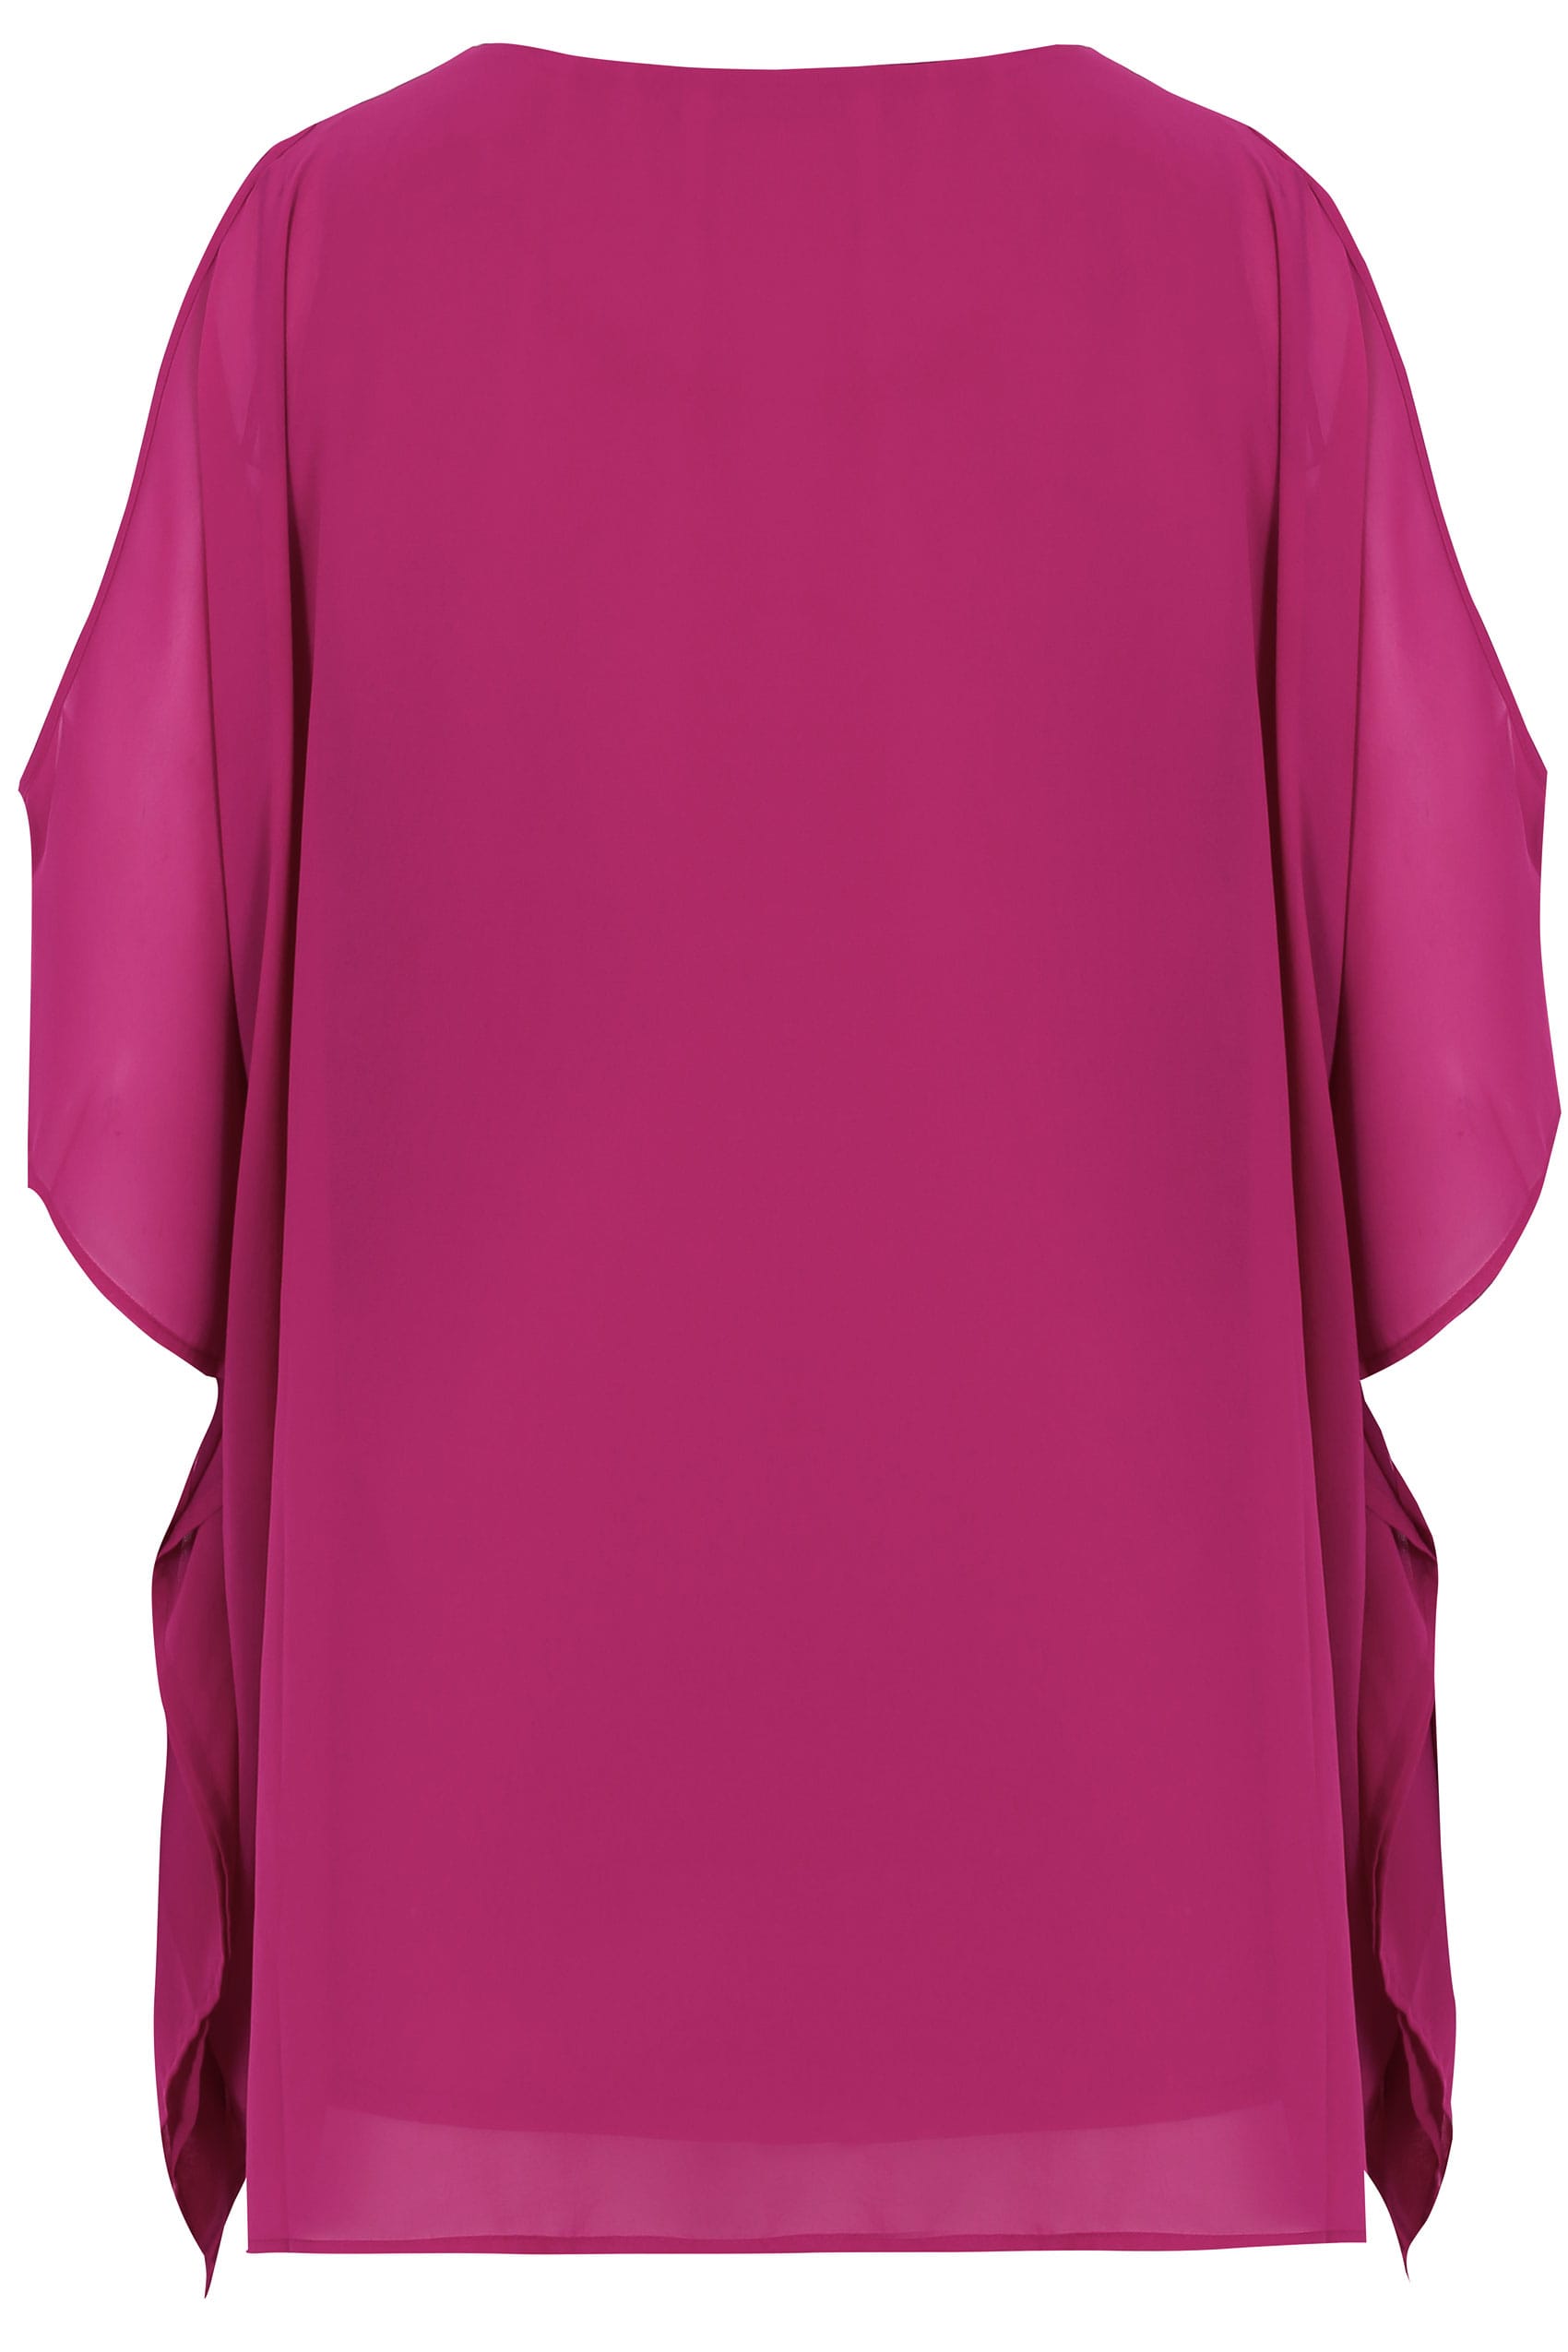 Fuchsia Pink Sequin V-Neck Blouse With Cold Shoulders, Plus size 16 ...